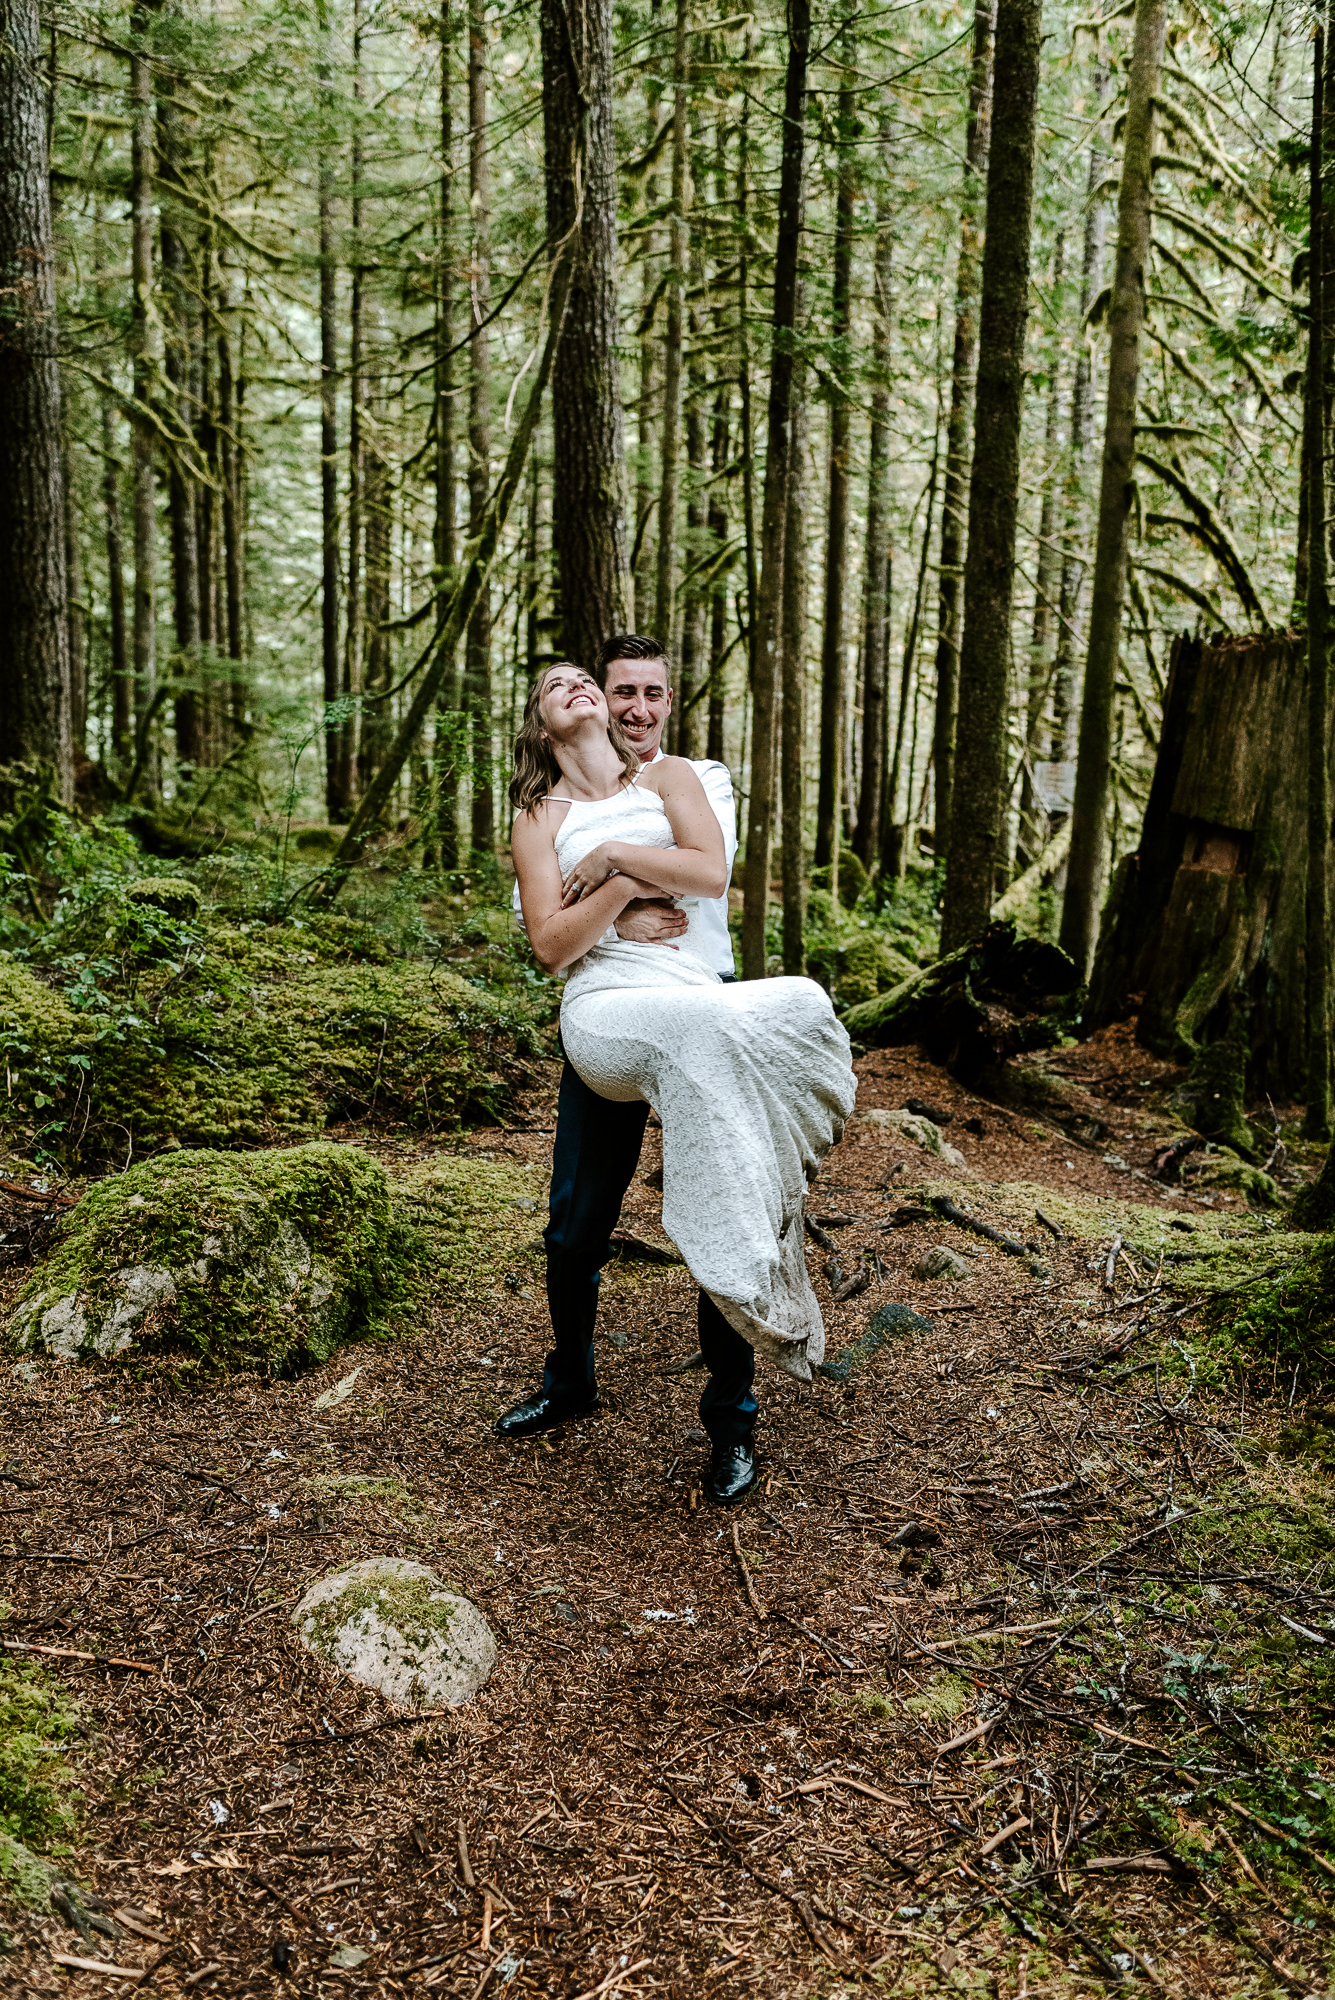 elopement locations in the US